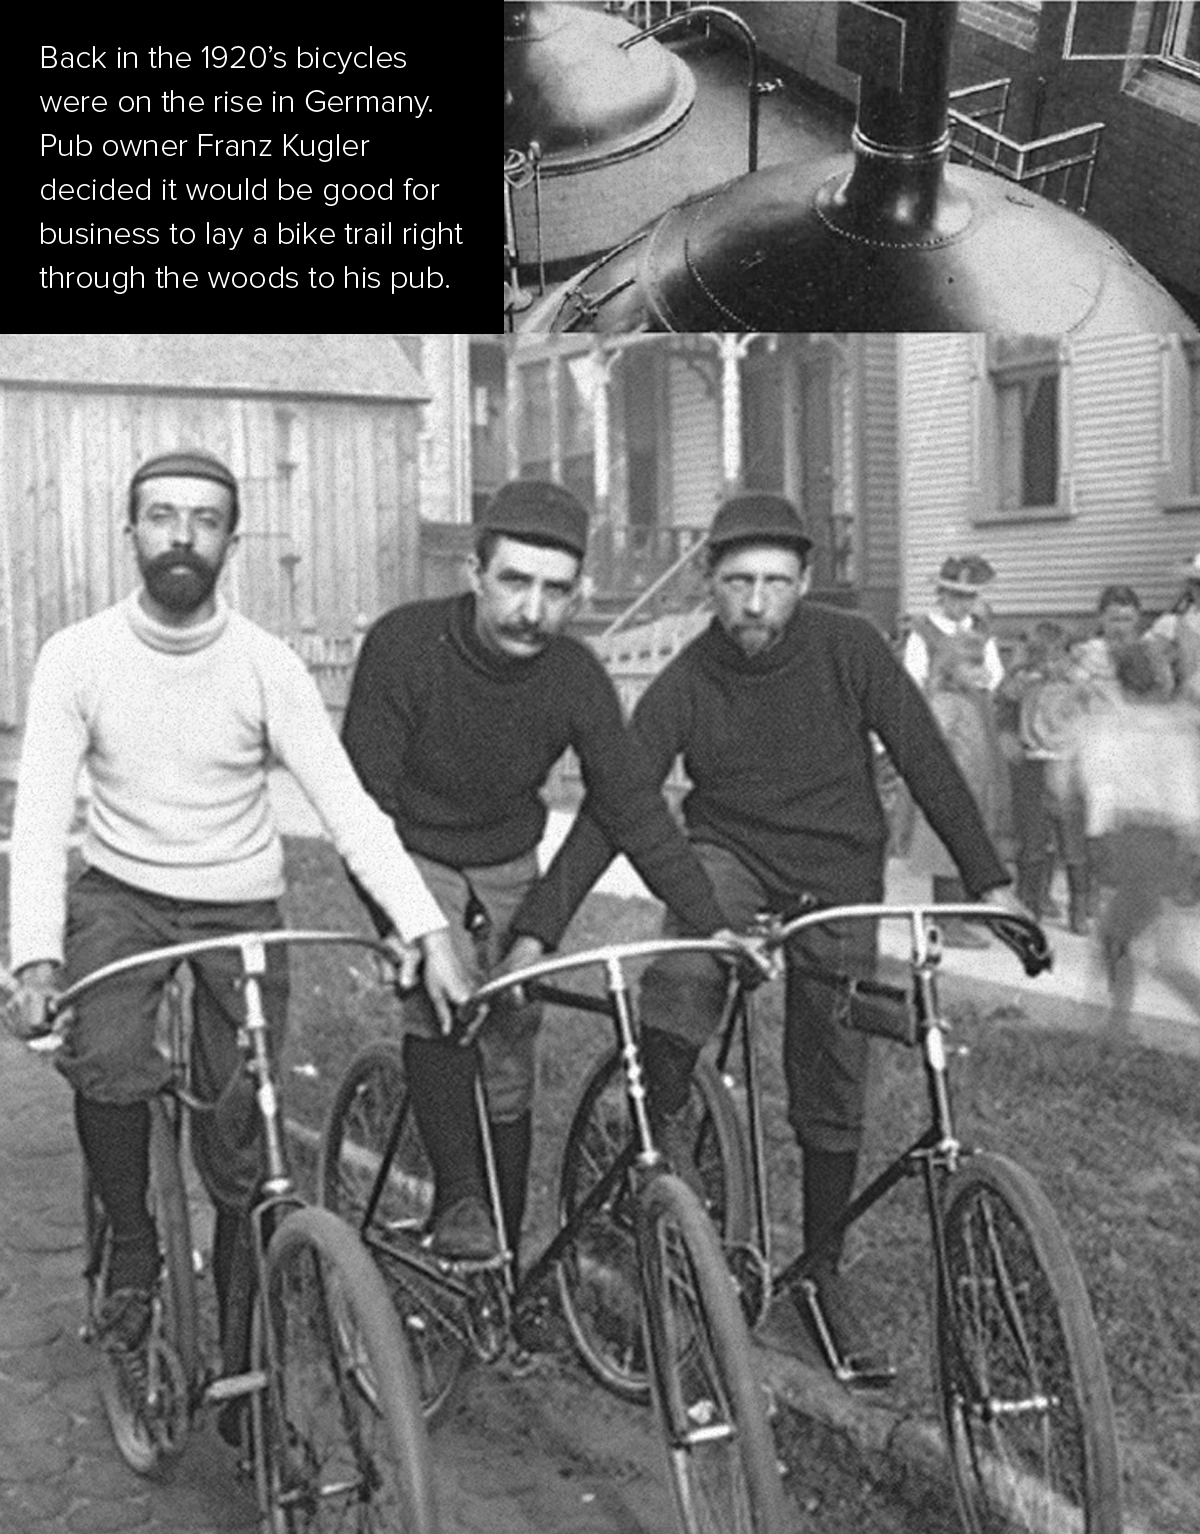 Grolsch Radler | Back in the 1920's bicycles were on the rise in Germany. Pub owner Franz Kugler decided it would be good for business to lay a bike trail right through the woods to his pub.